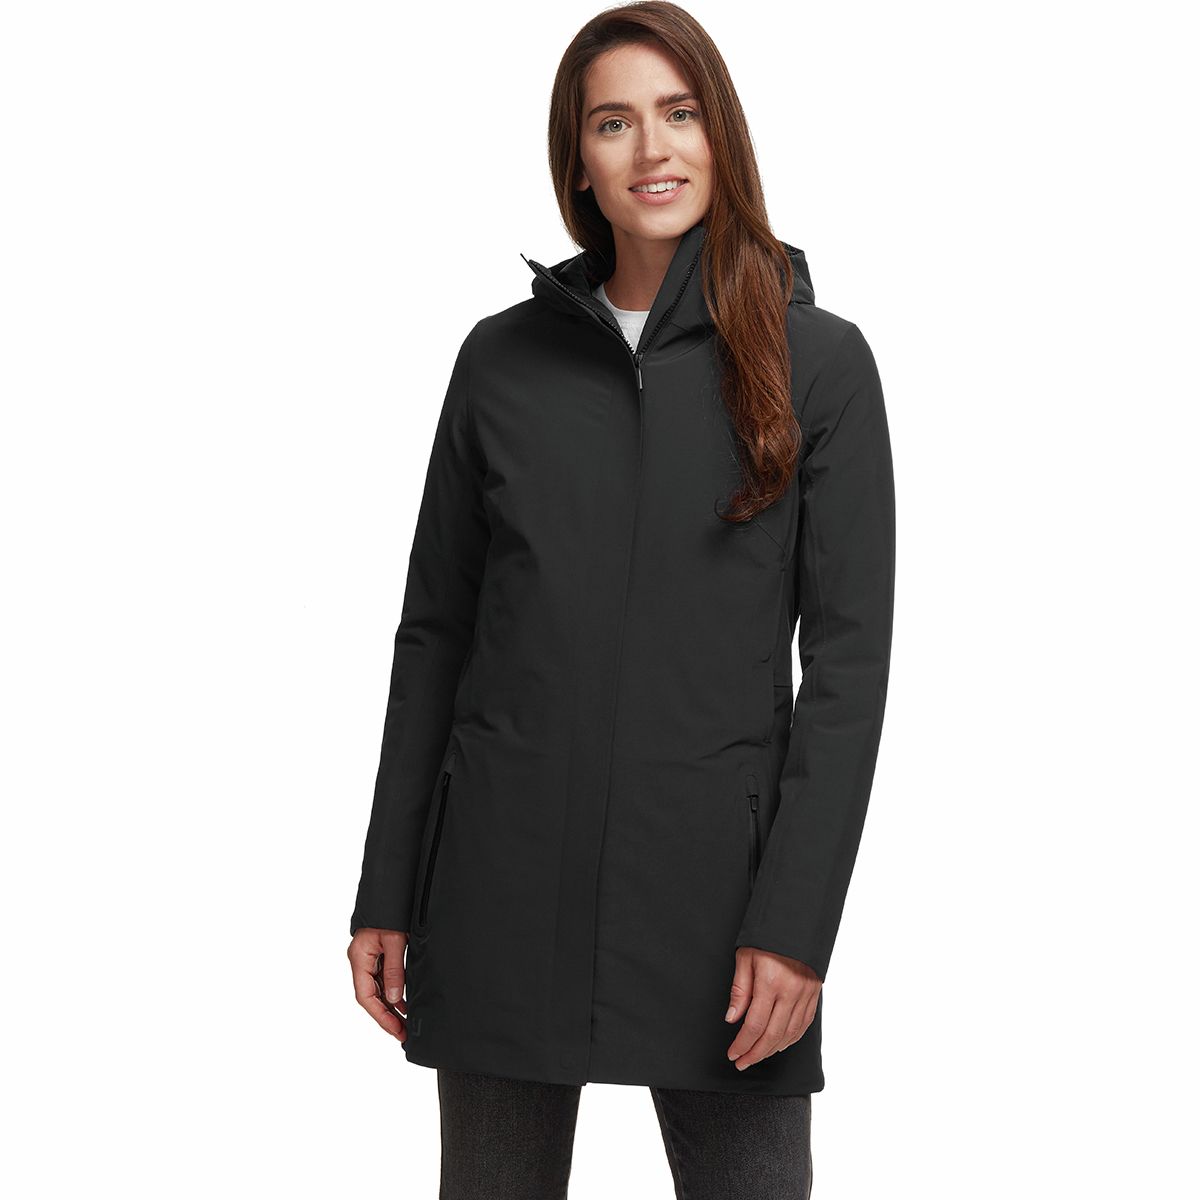 UBR Spectra Insulated Parka - Women's